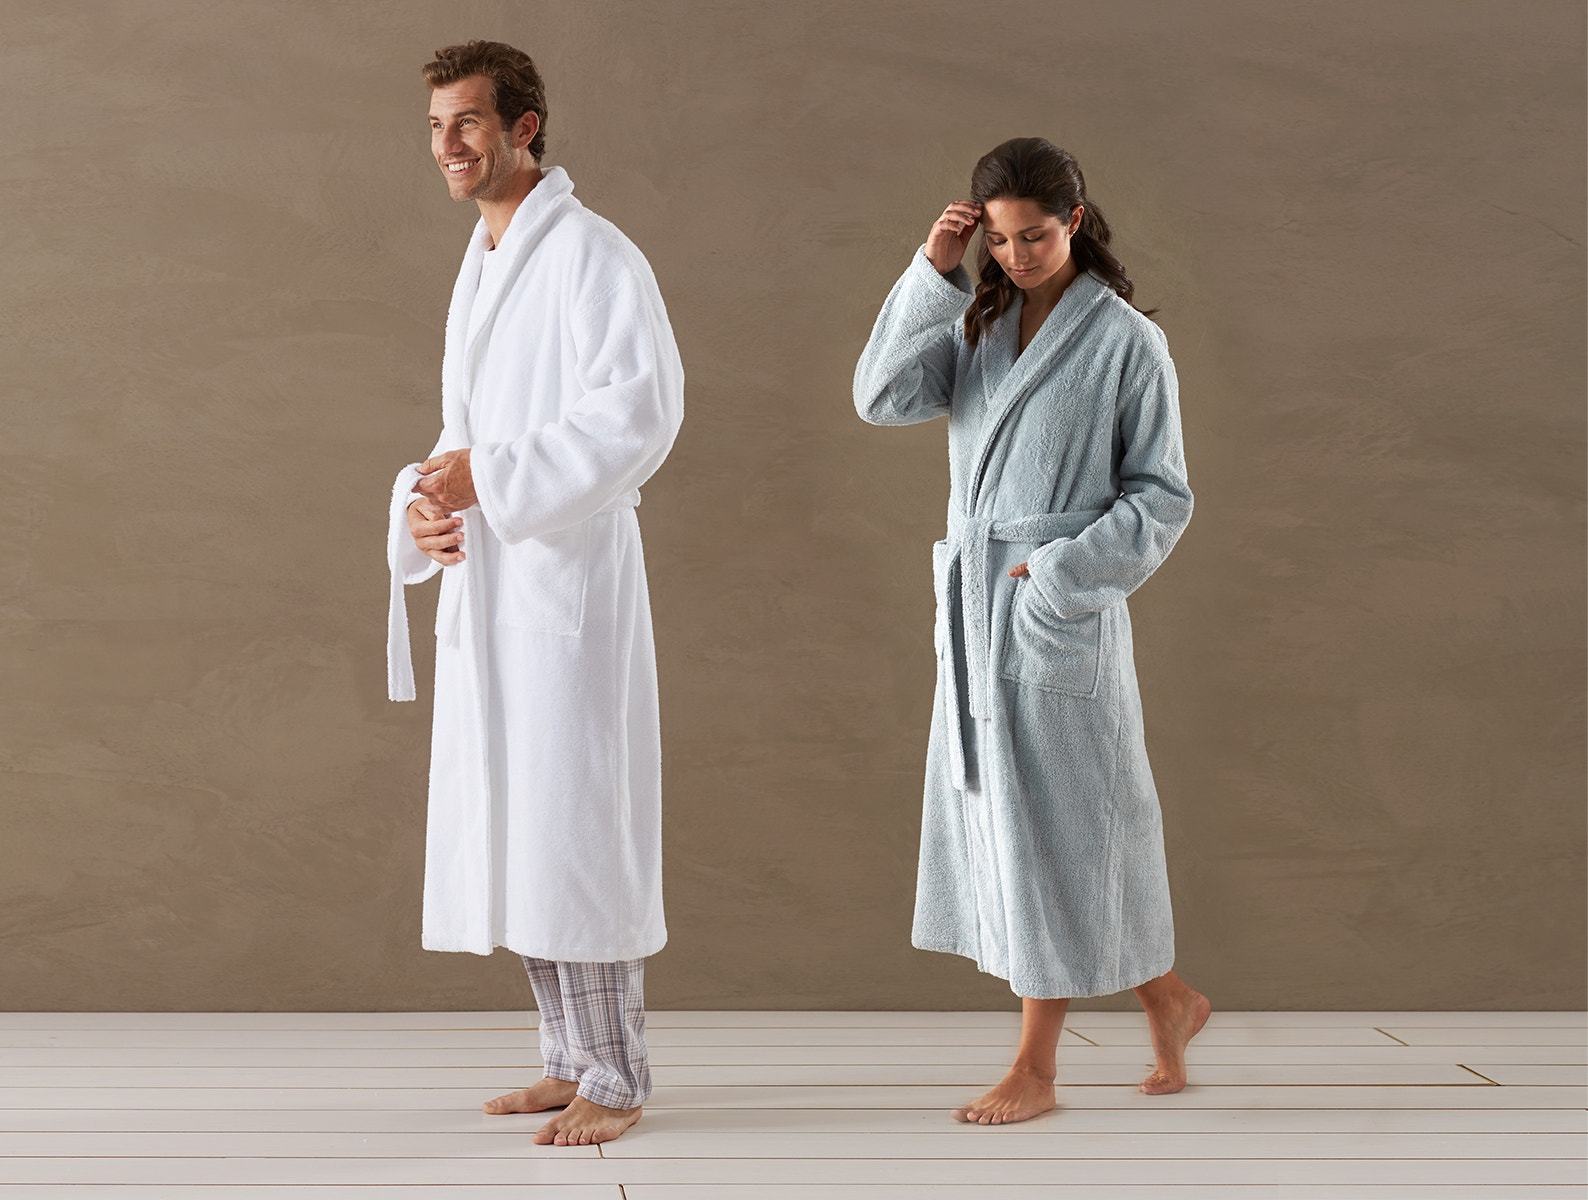 Organic robes by Coyuchi. Organic cotton and linen bathrobes for men and women. 